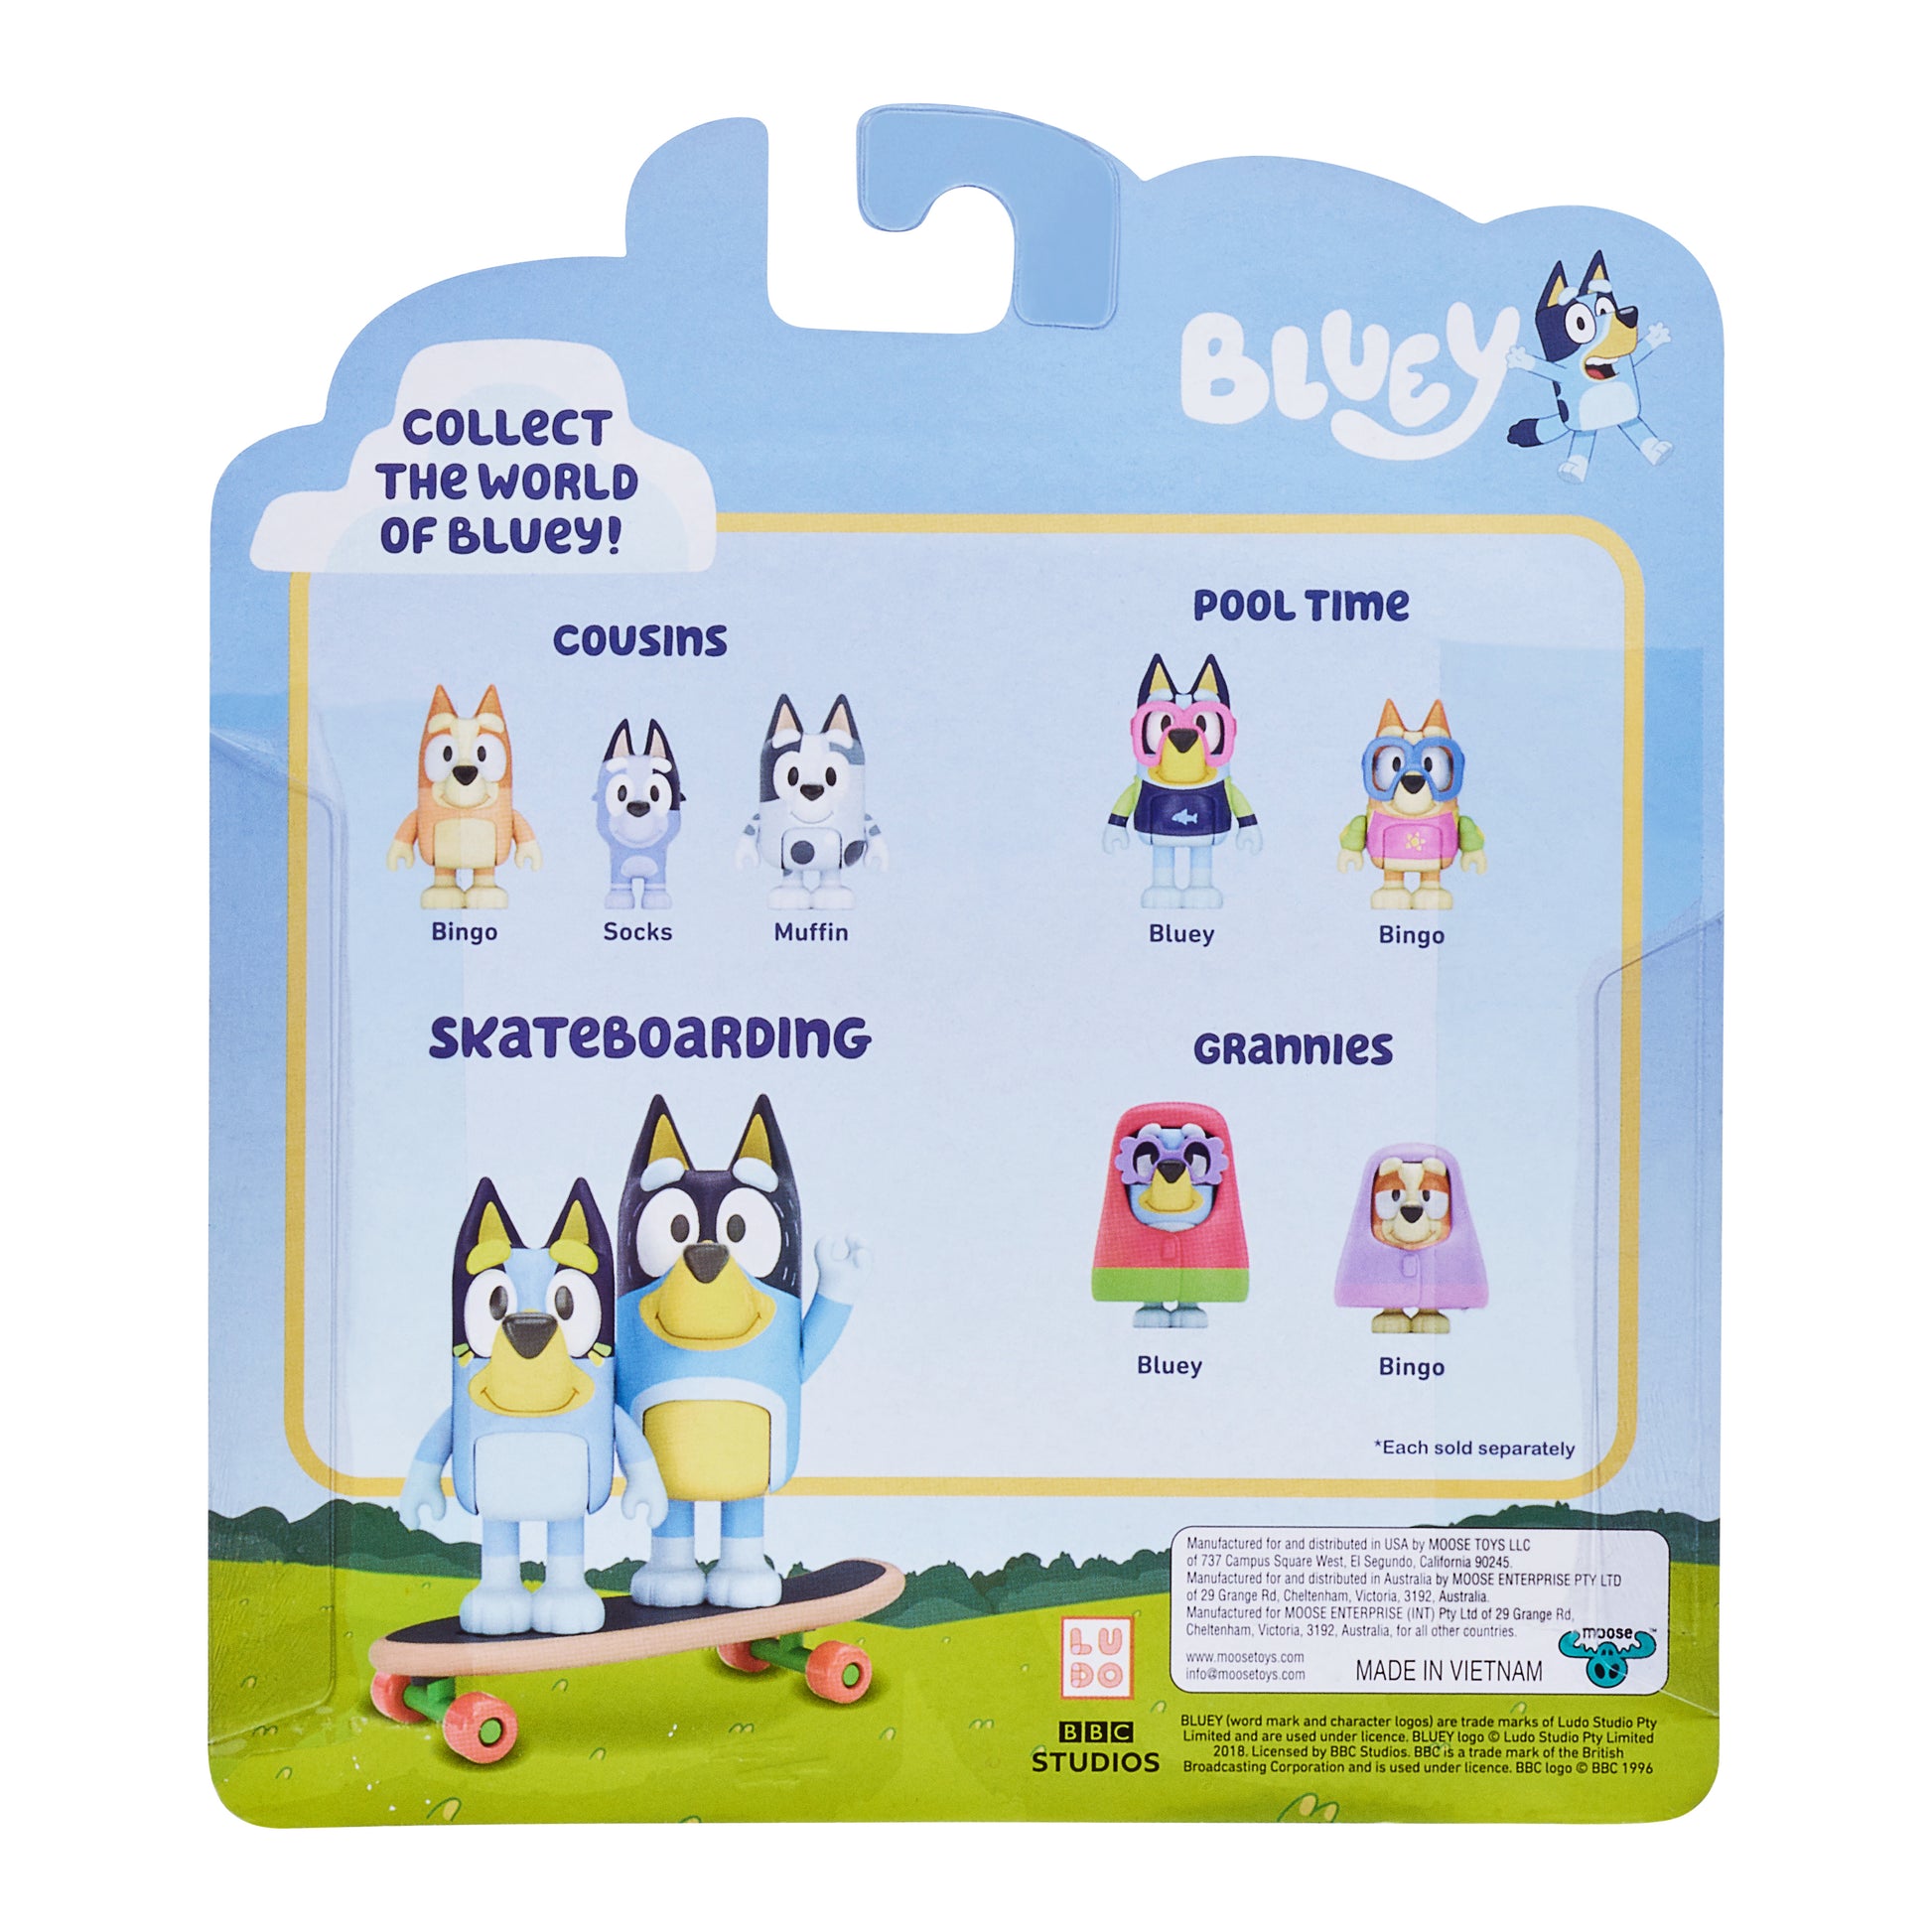 Bluey & Bandit (Dad) Mini Figure 2-Pack (Play Time)